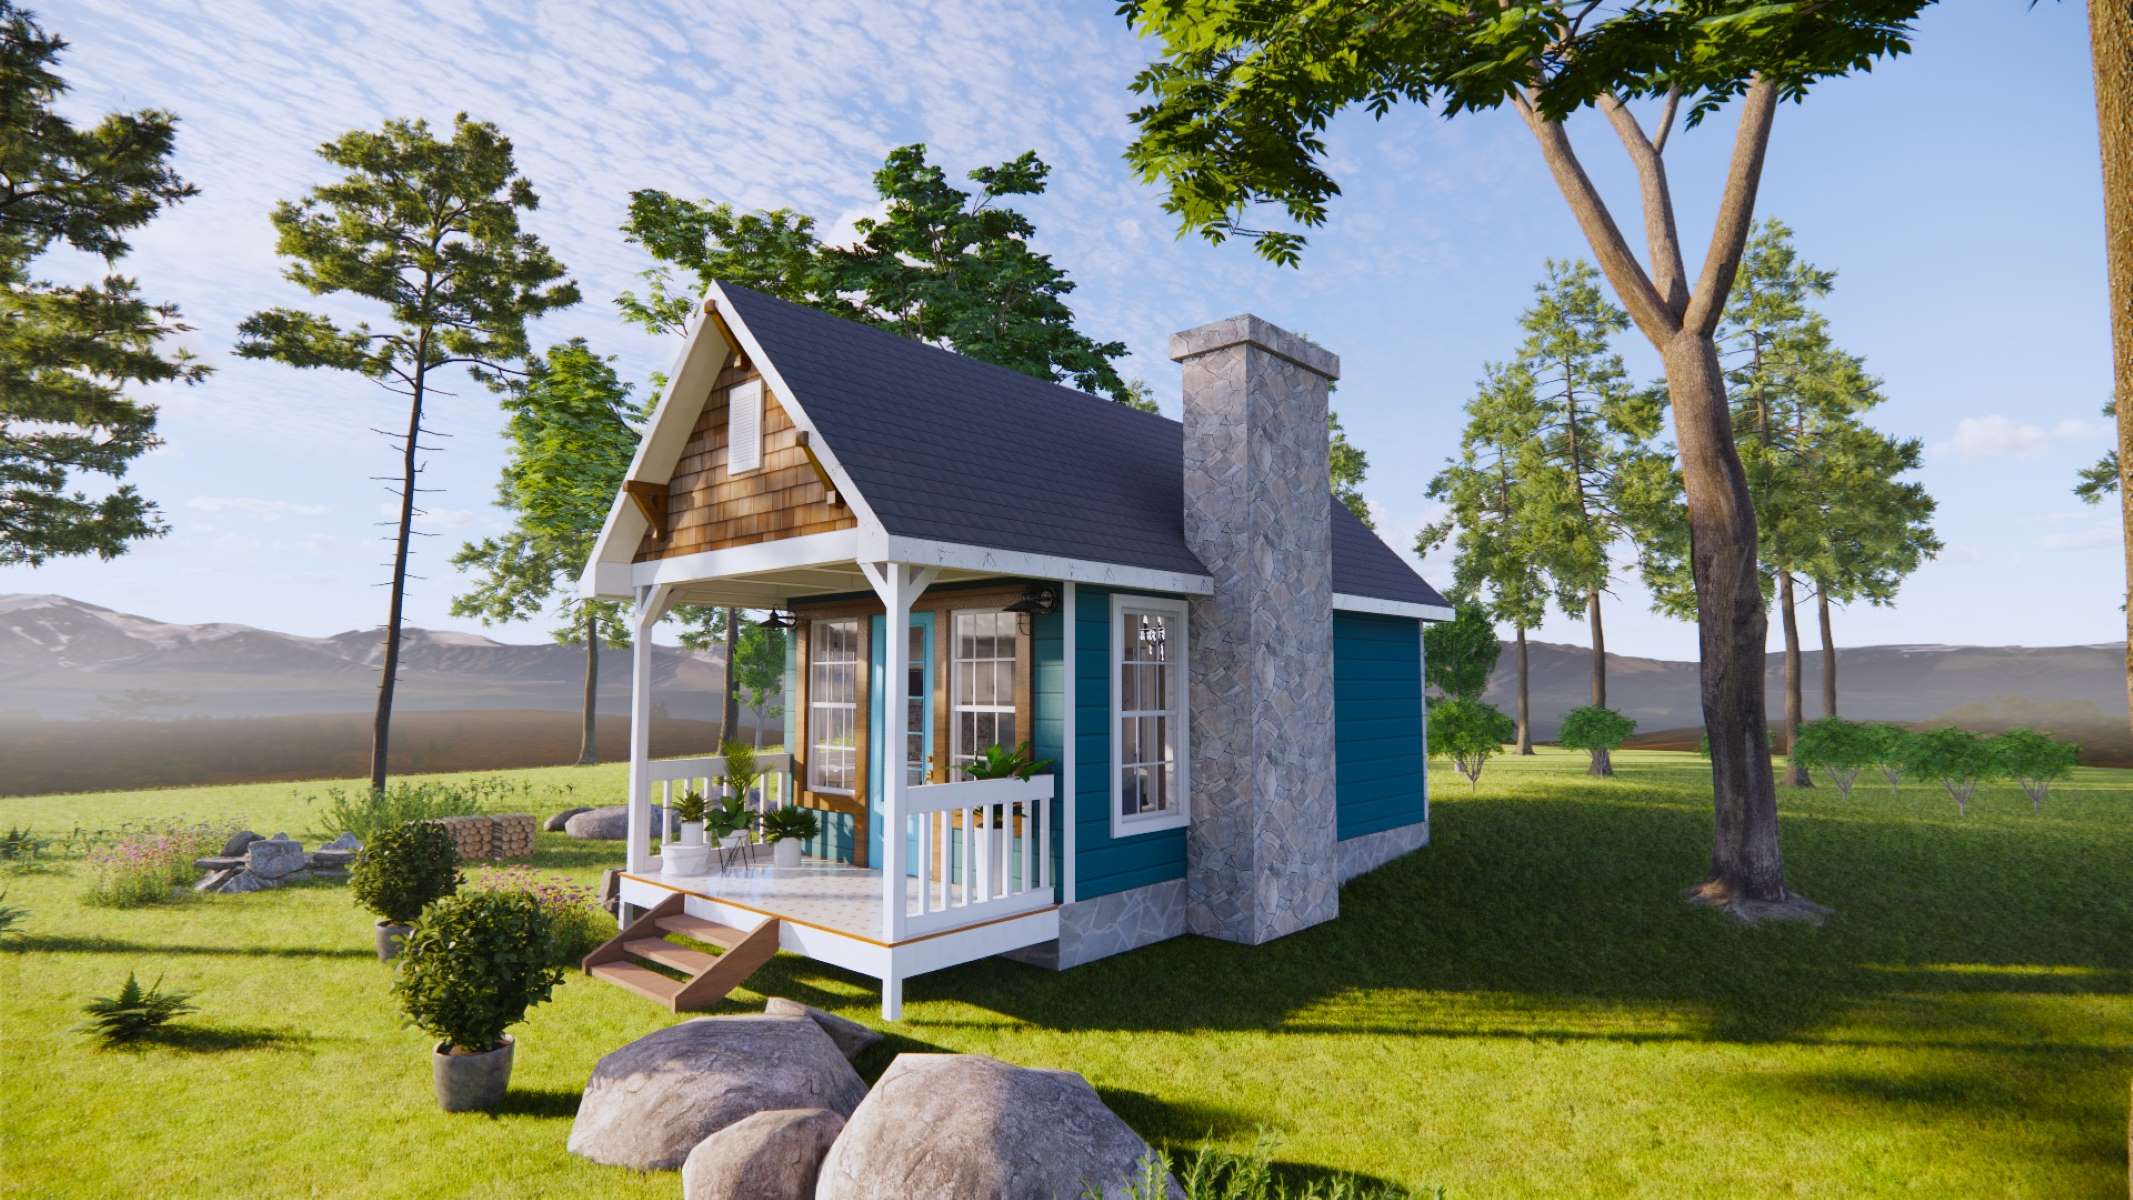 How To Design And Build Plans For A Tiny House | Storables